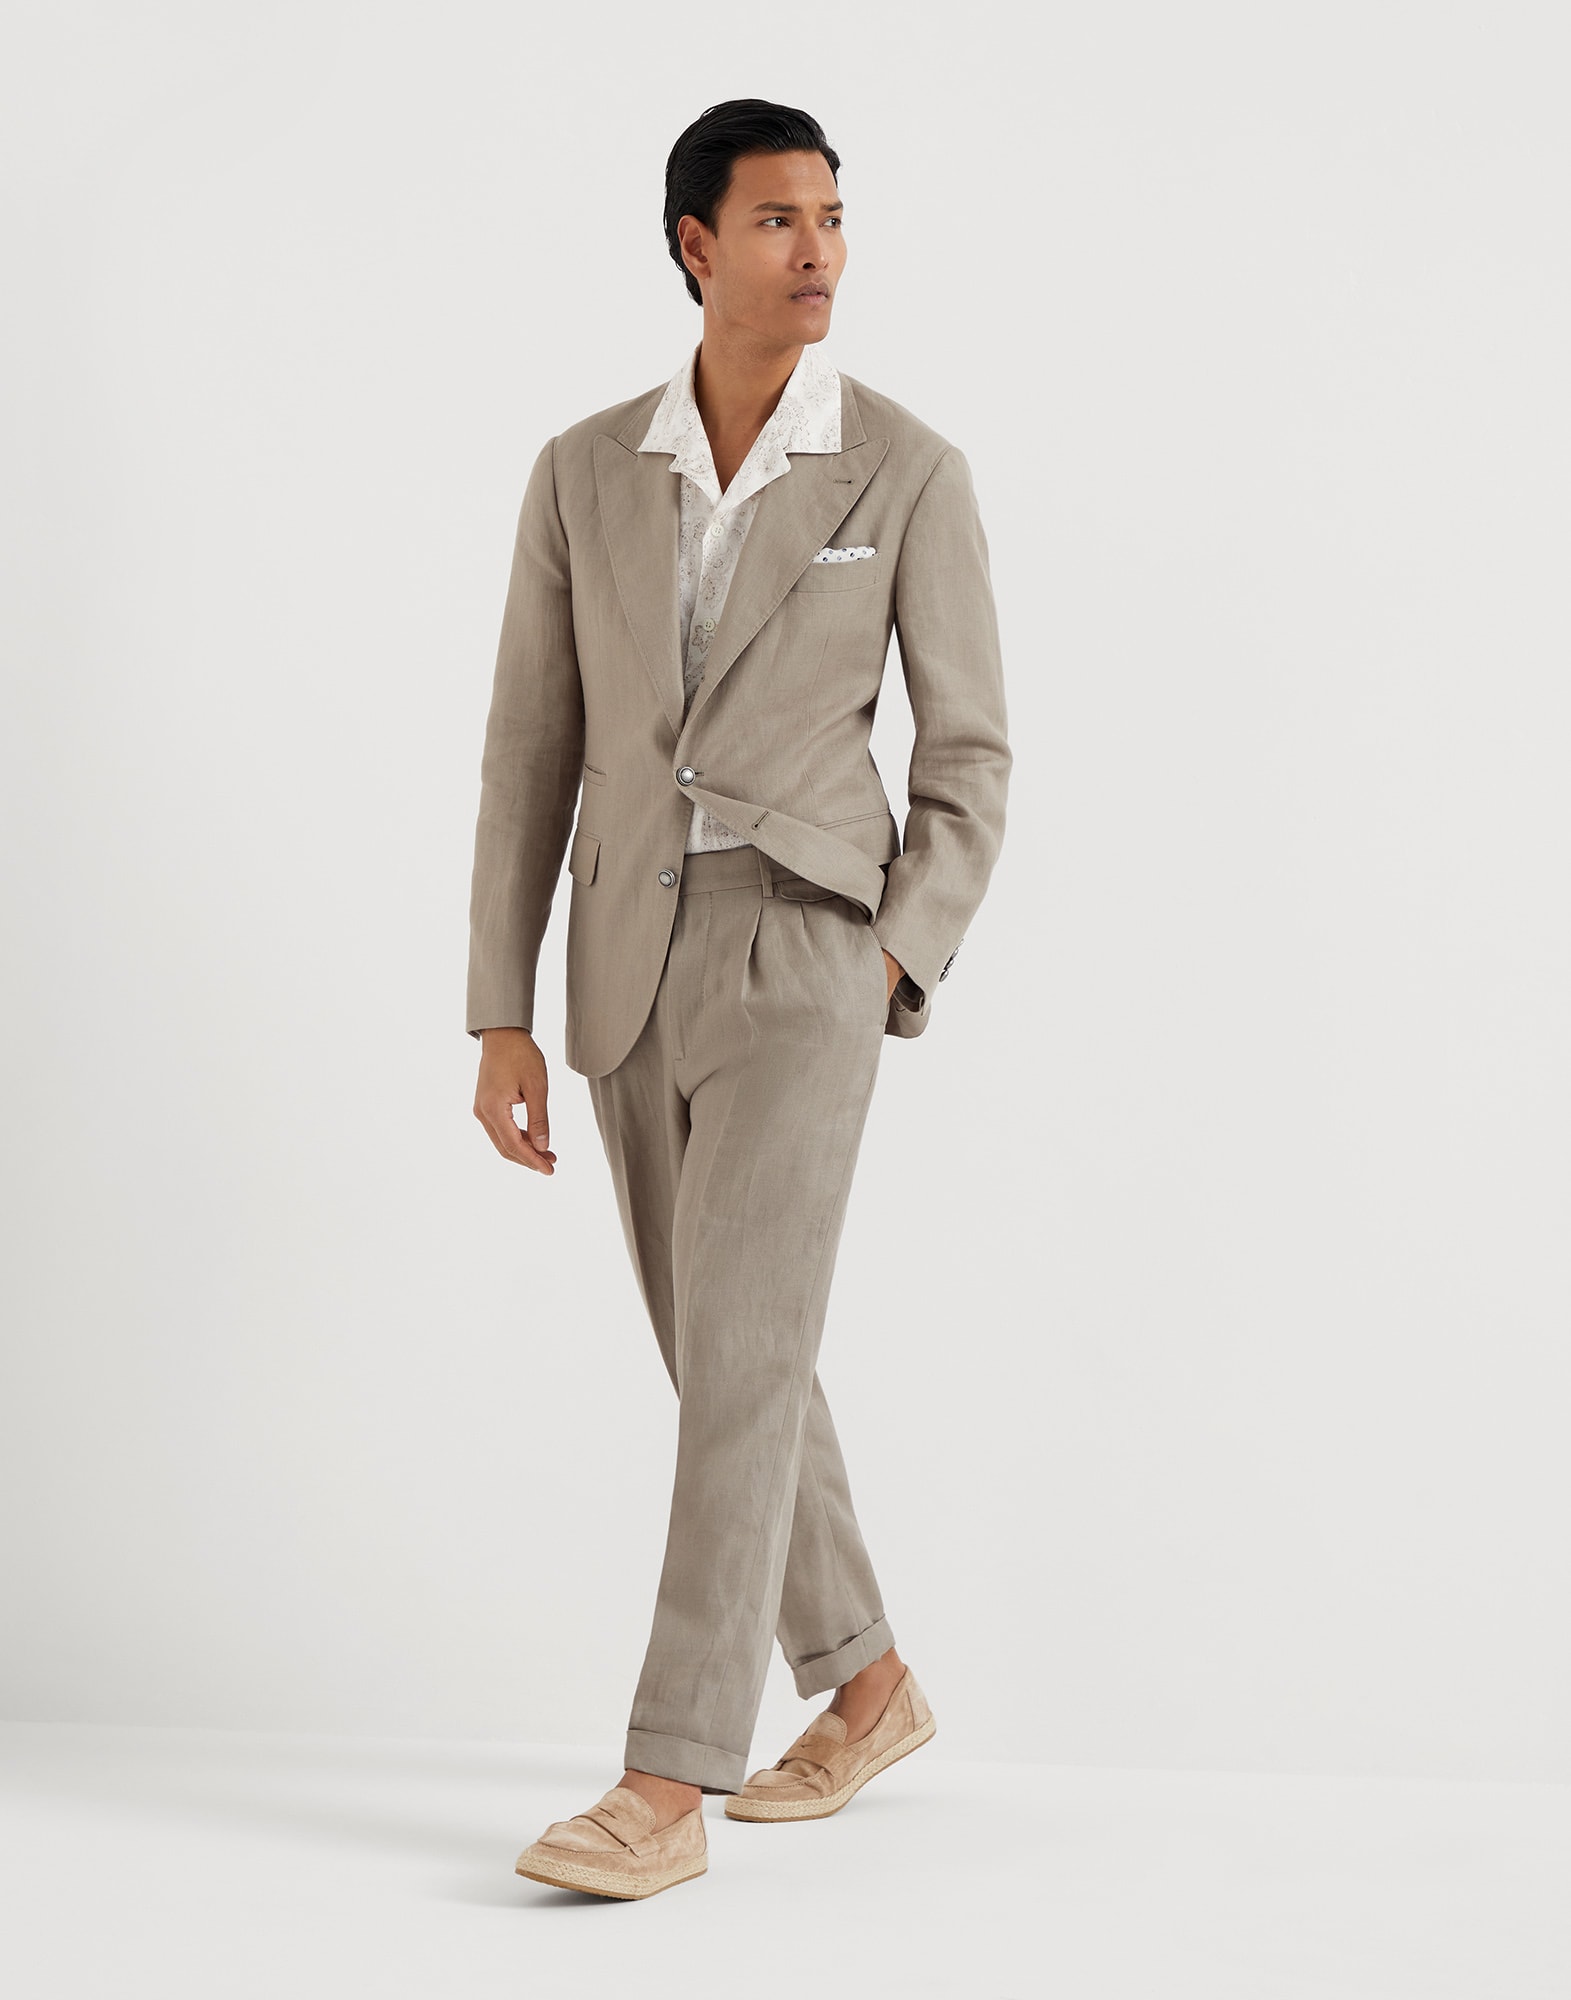 Discover Look 242MOUTFITMP442LDFRDC068 - Brunello Cucinelli